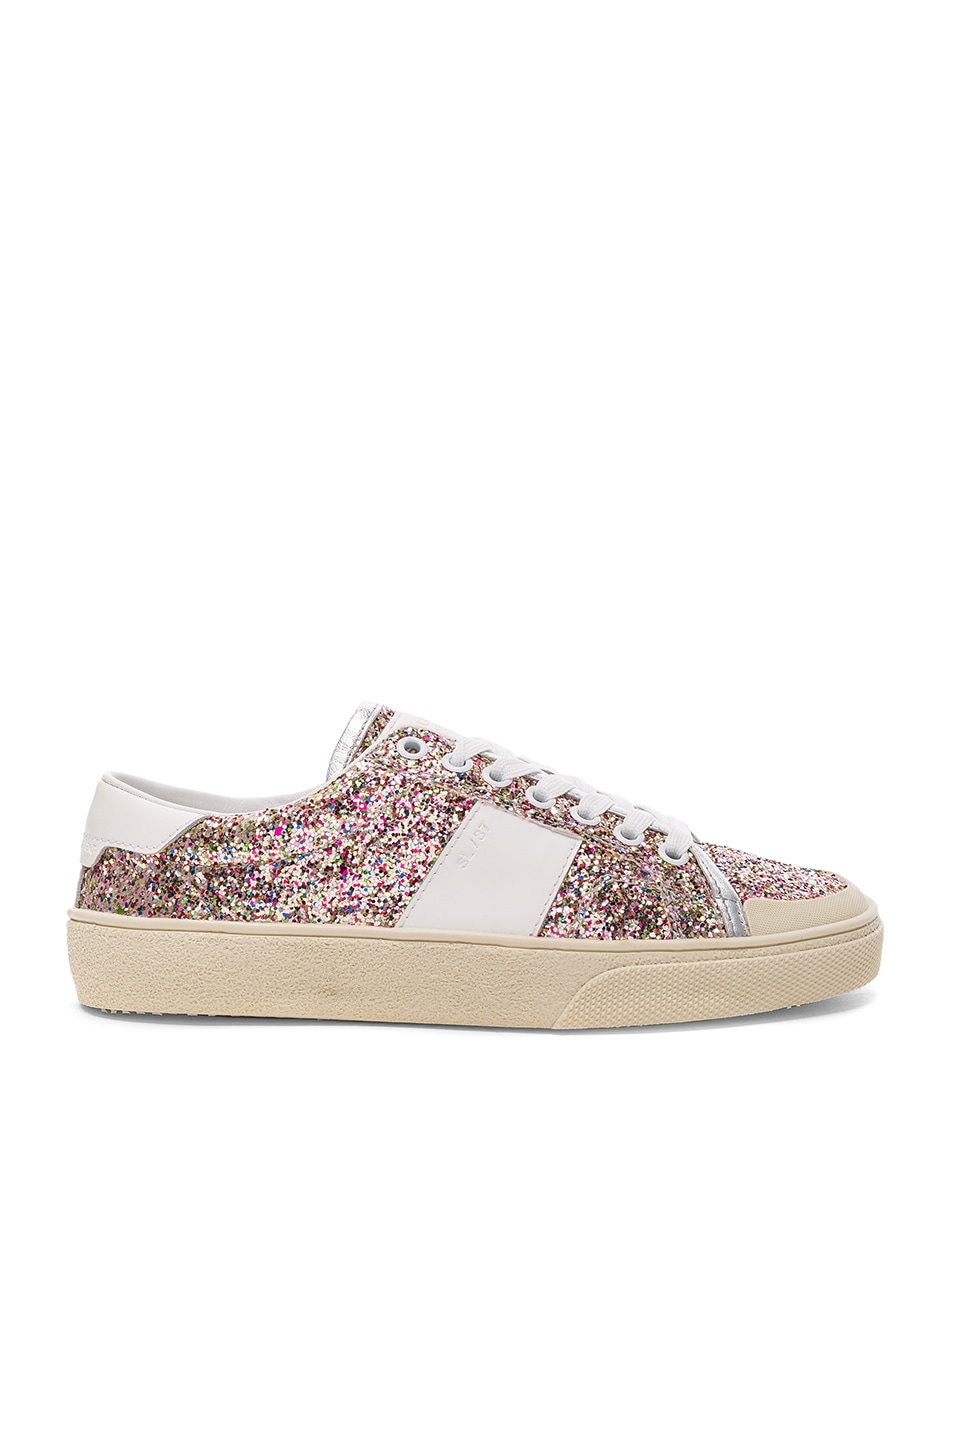 Image 1 of Saint Laurent Glitter Court Classic Sneakers in Multi & Off White